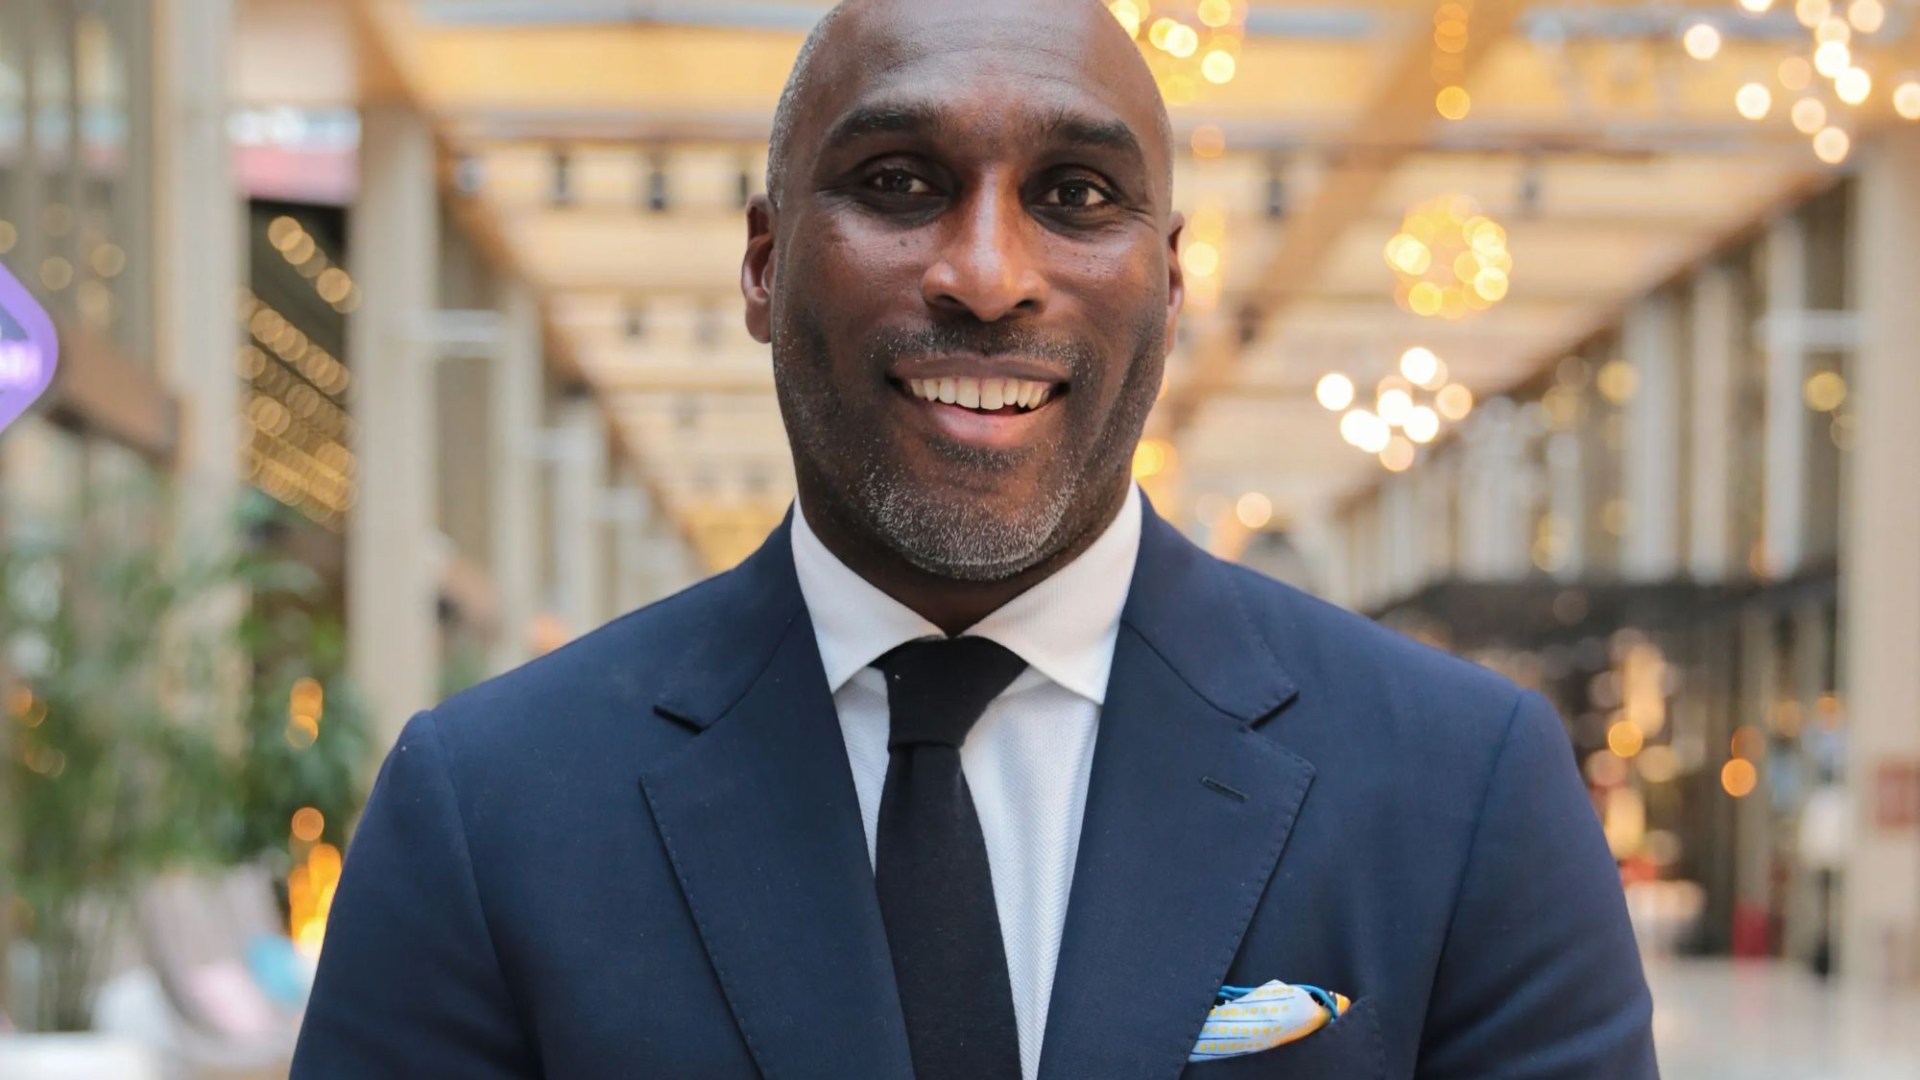 Ex-England captain Sol Campbell sued for more than £800k after pulling out of buying £3.85m flat